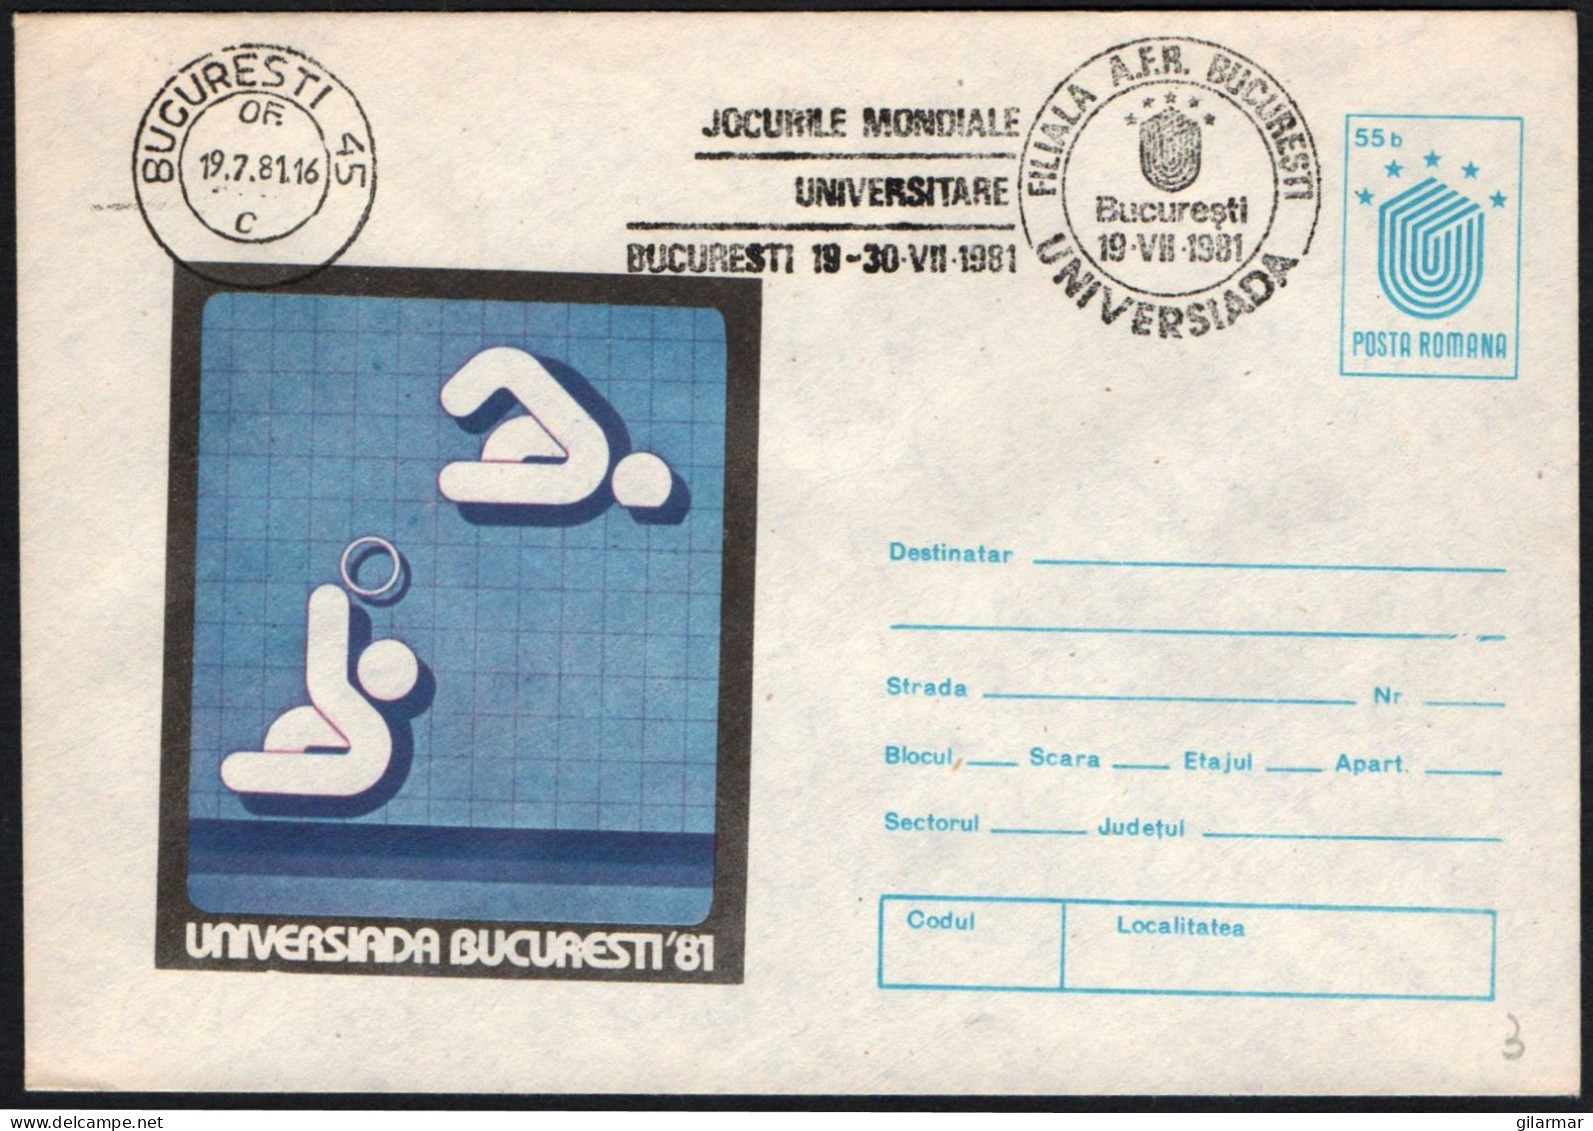 ROMANIA BUCHAREST 1981 - UNIVERSITY GAMES 1981 - STATIONARY: WATER POLO - G - Water Polo